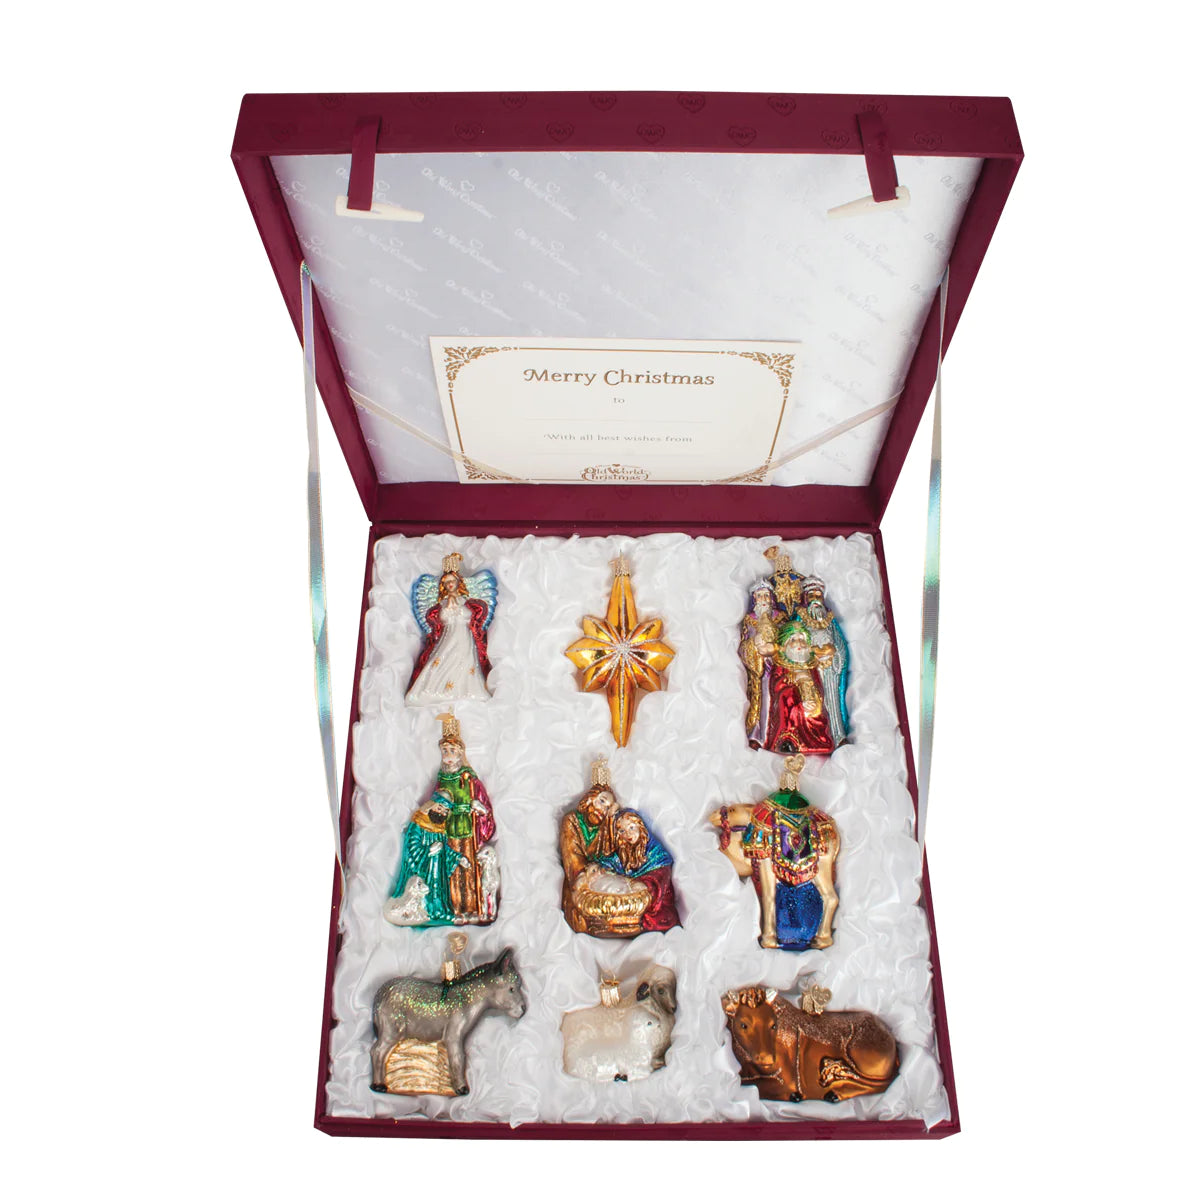 Old World Christmas Nativity glass ornament collection 